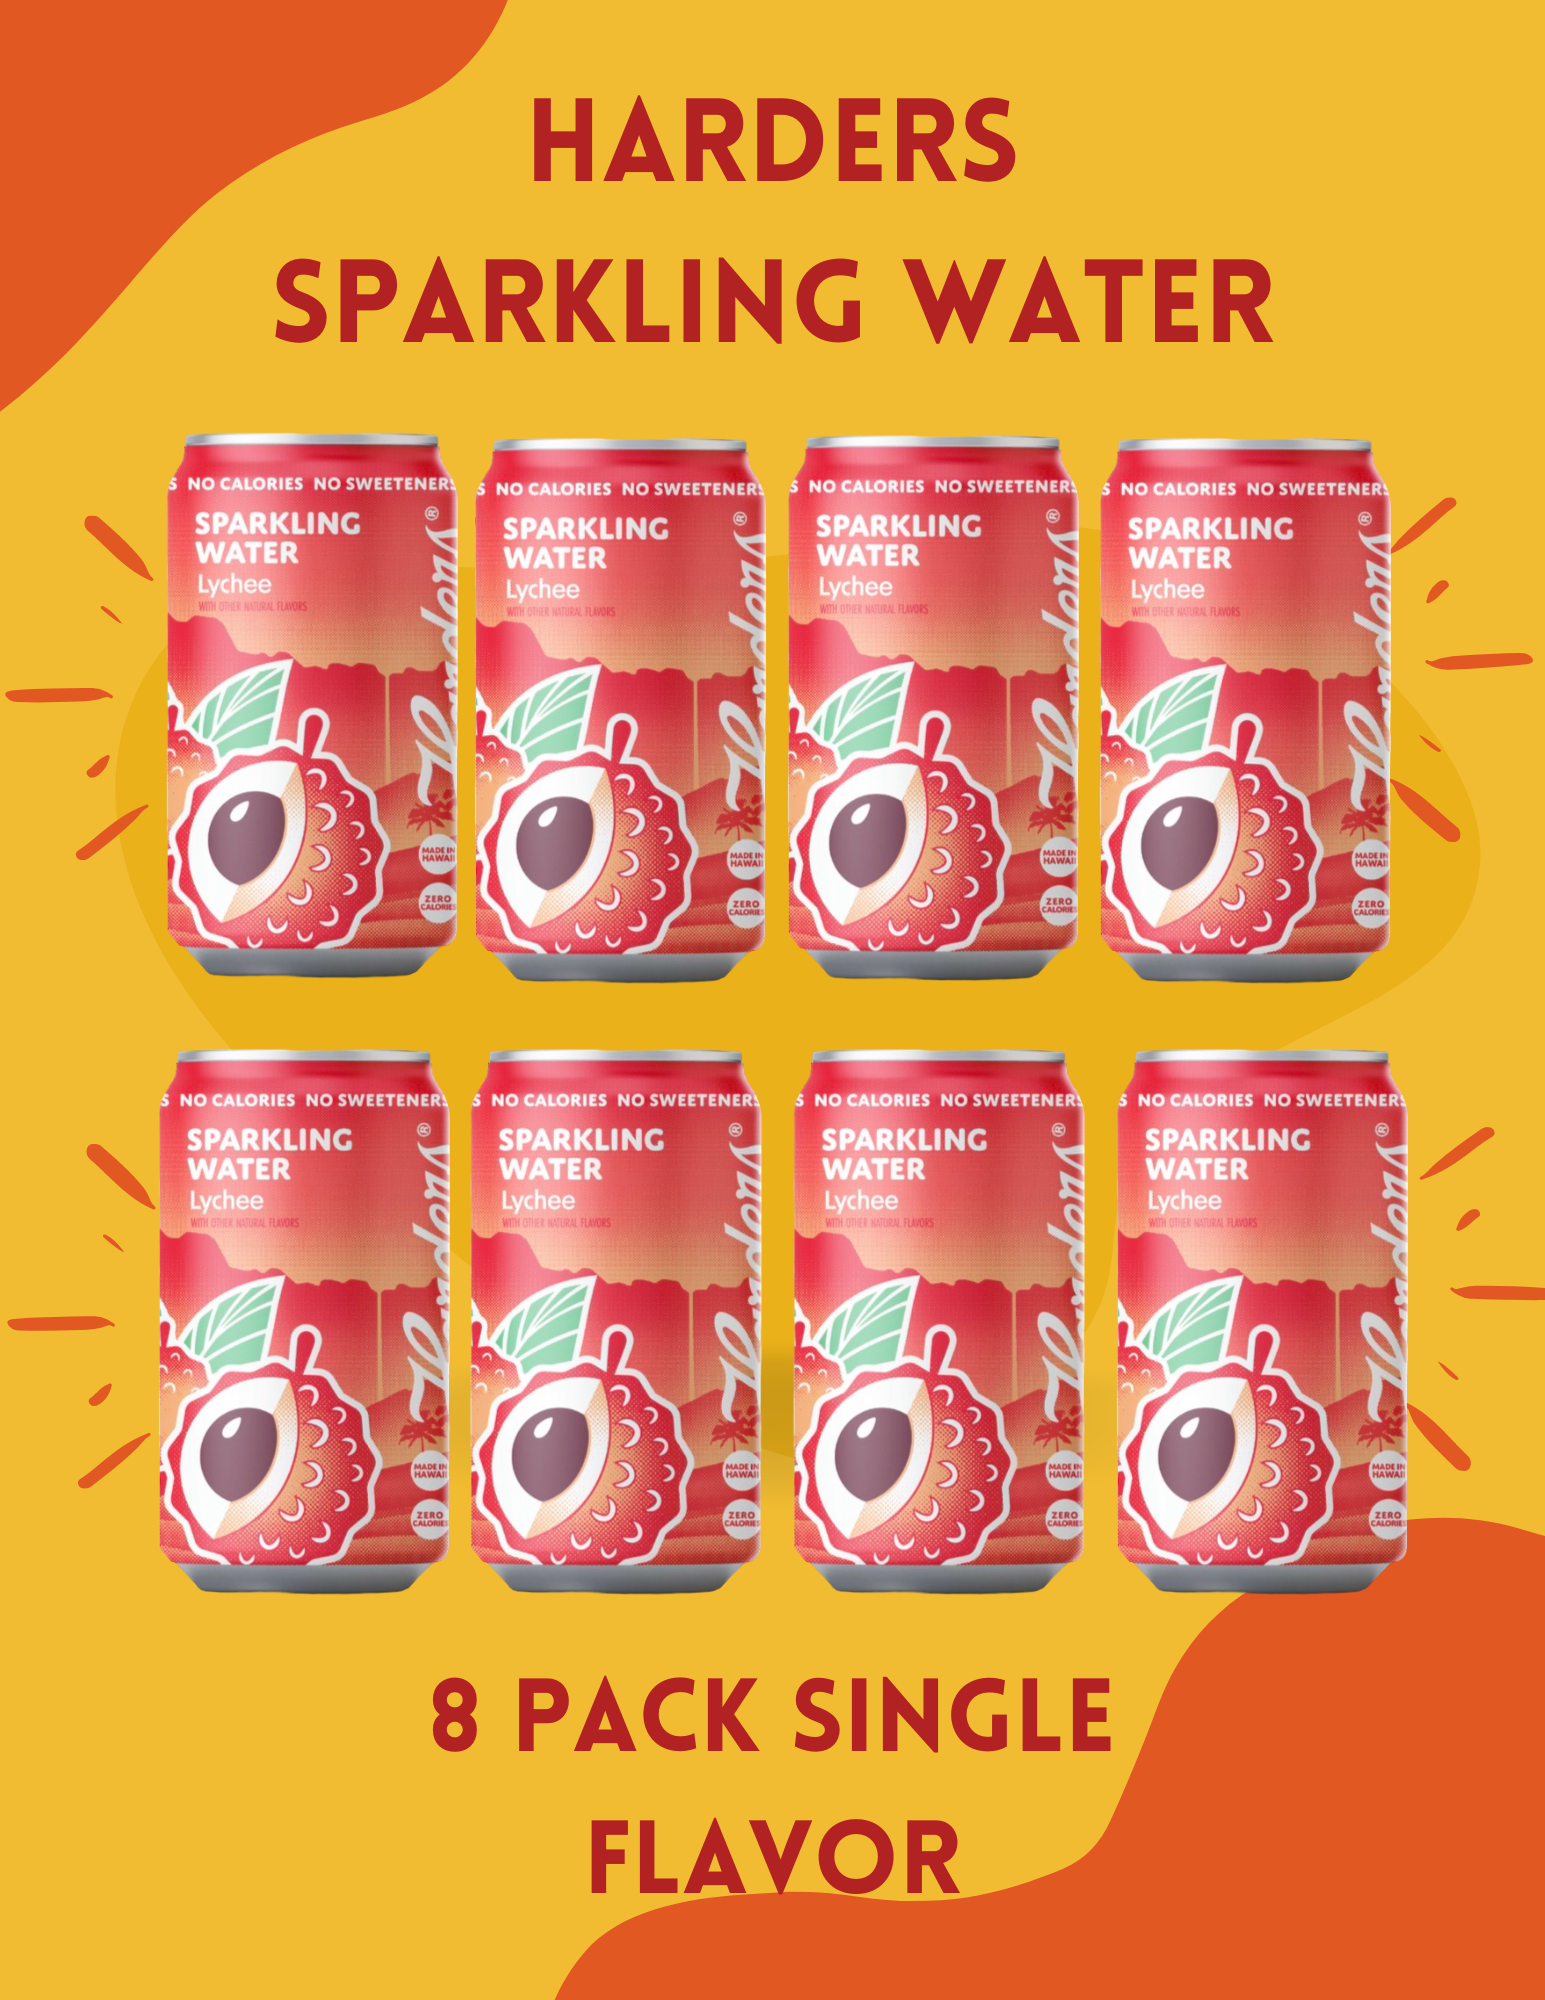 Sparkling Water 8 Pack Single Flavor (FREE U.S. SHIPPING)